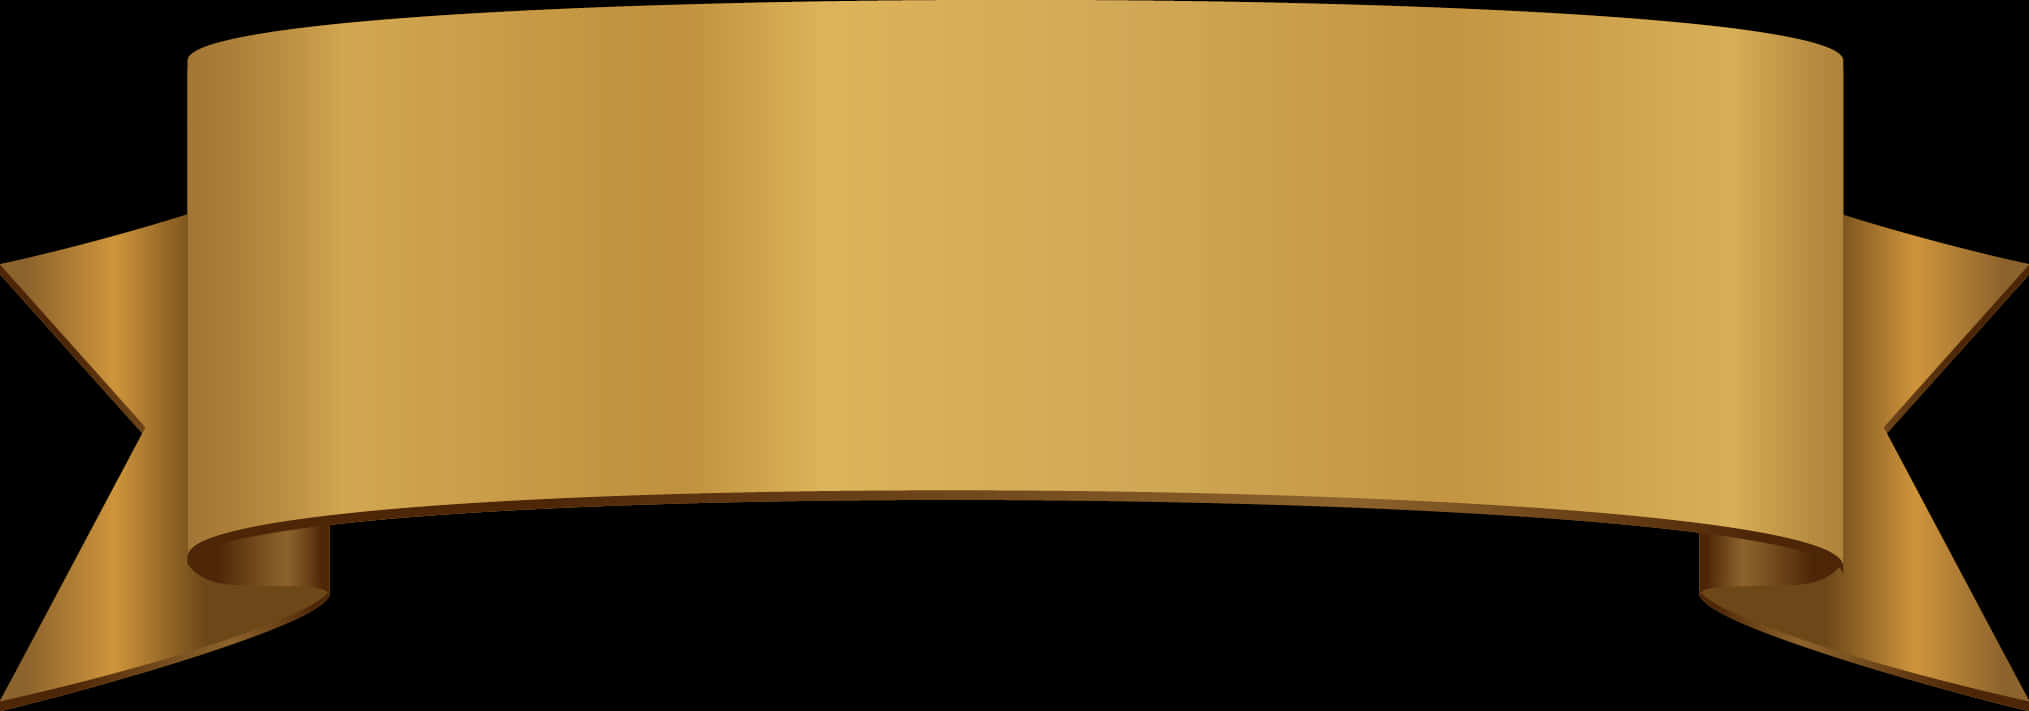 A Gold And Black Background